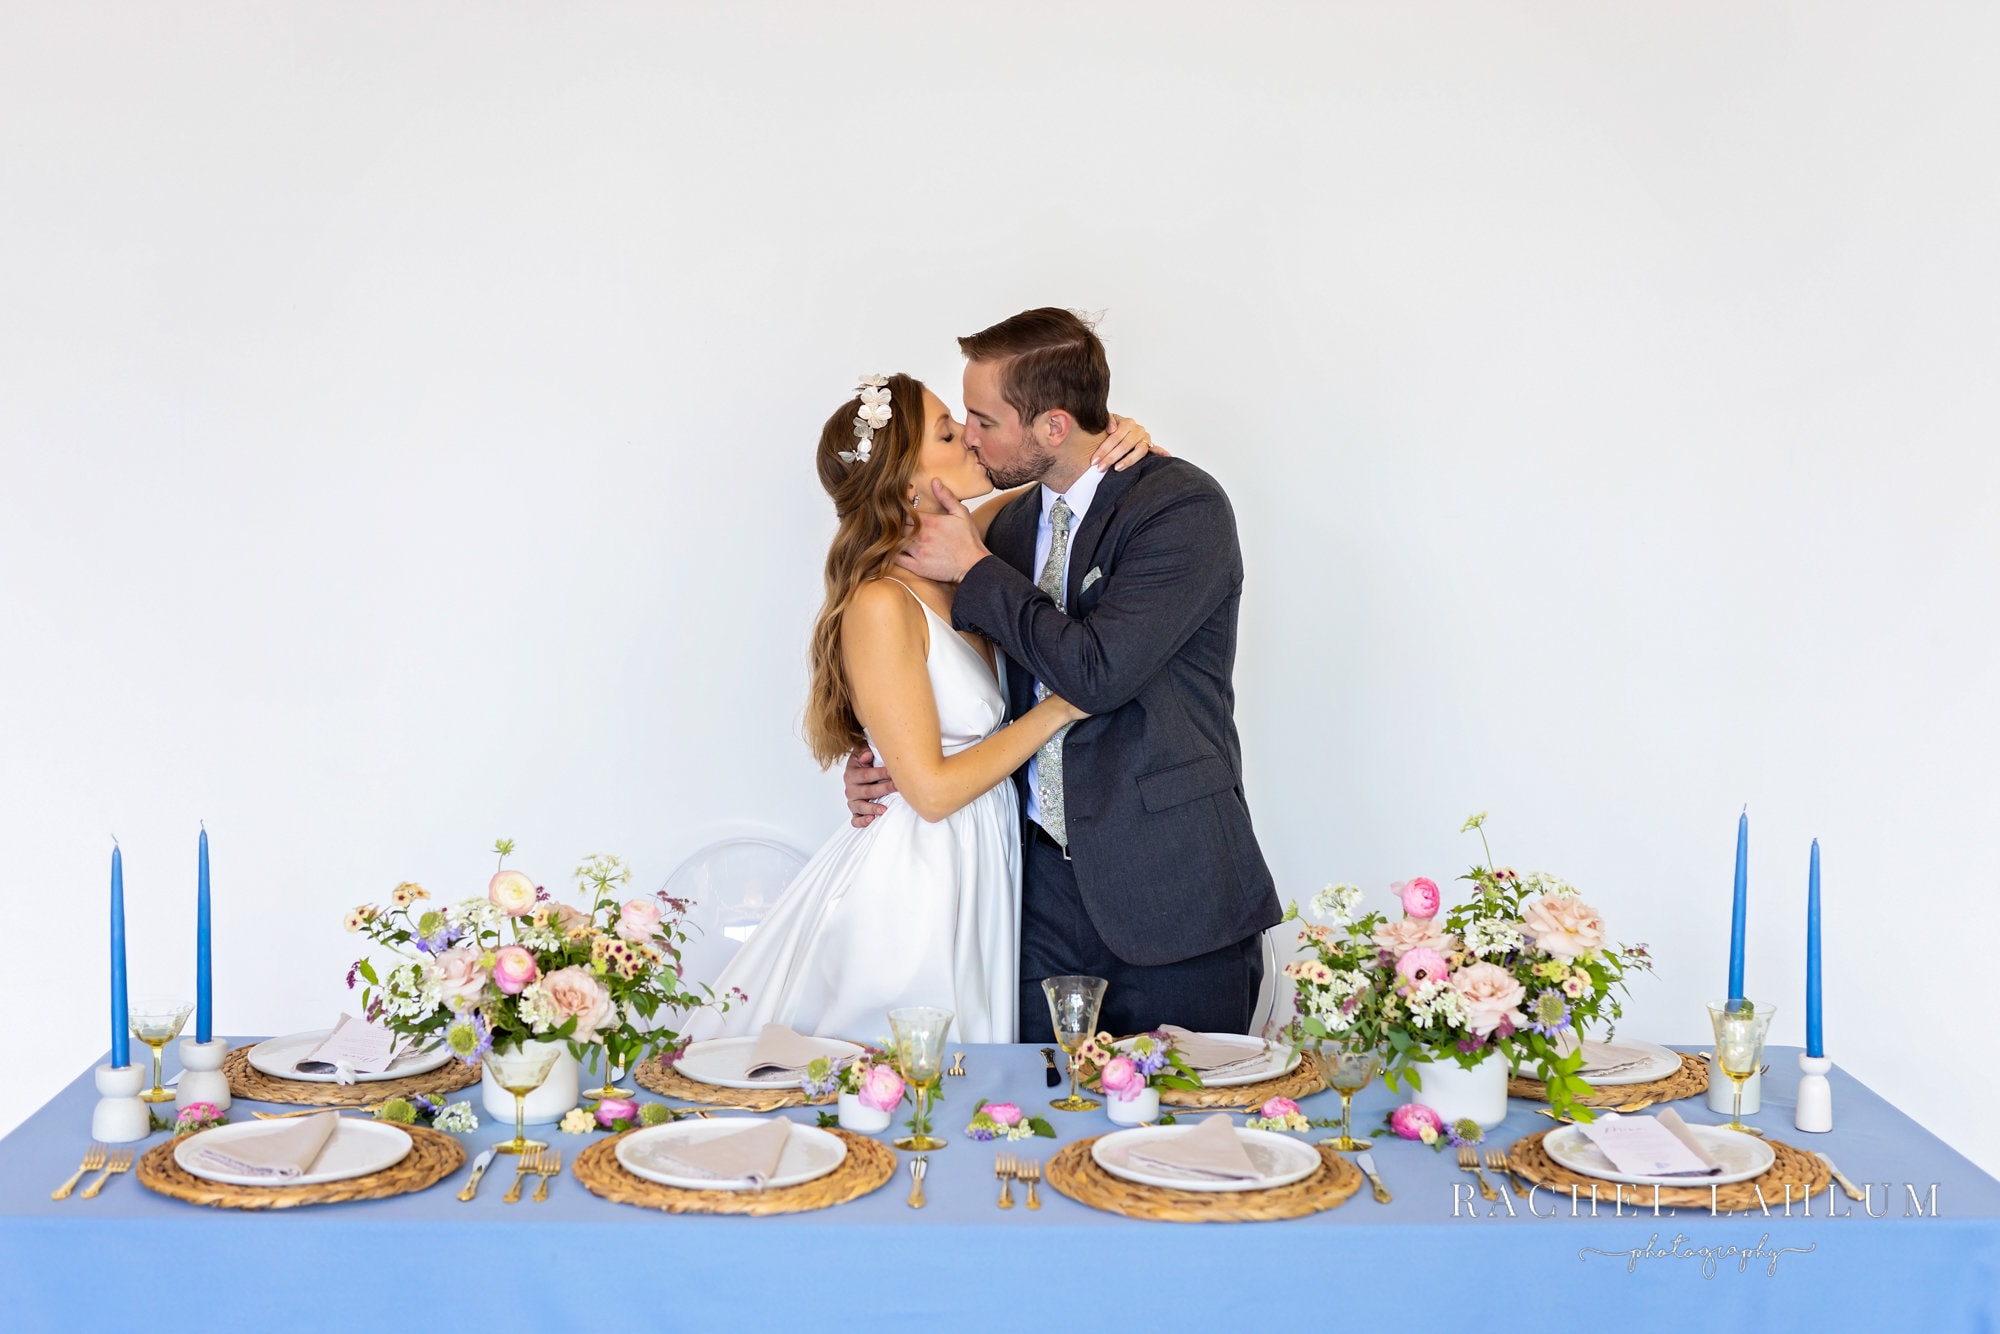 Bride and groom kiss behind spring-like table place settings at stylized wedding shoot. 